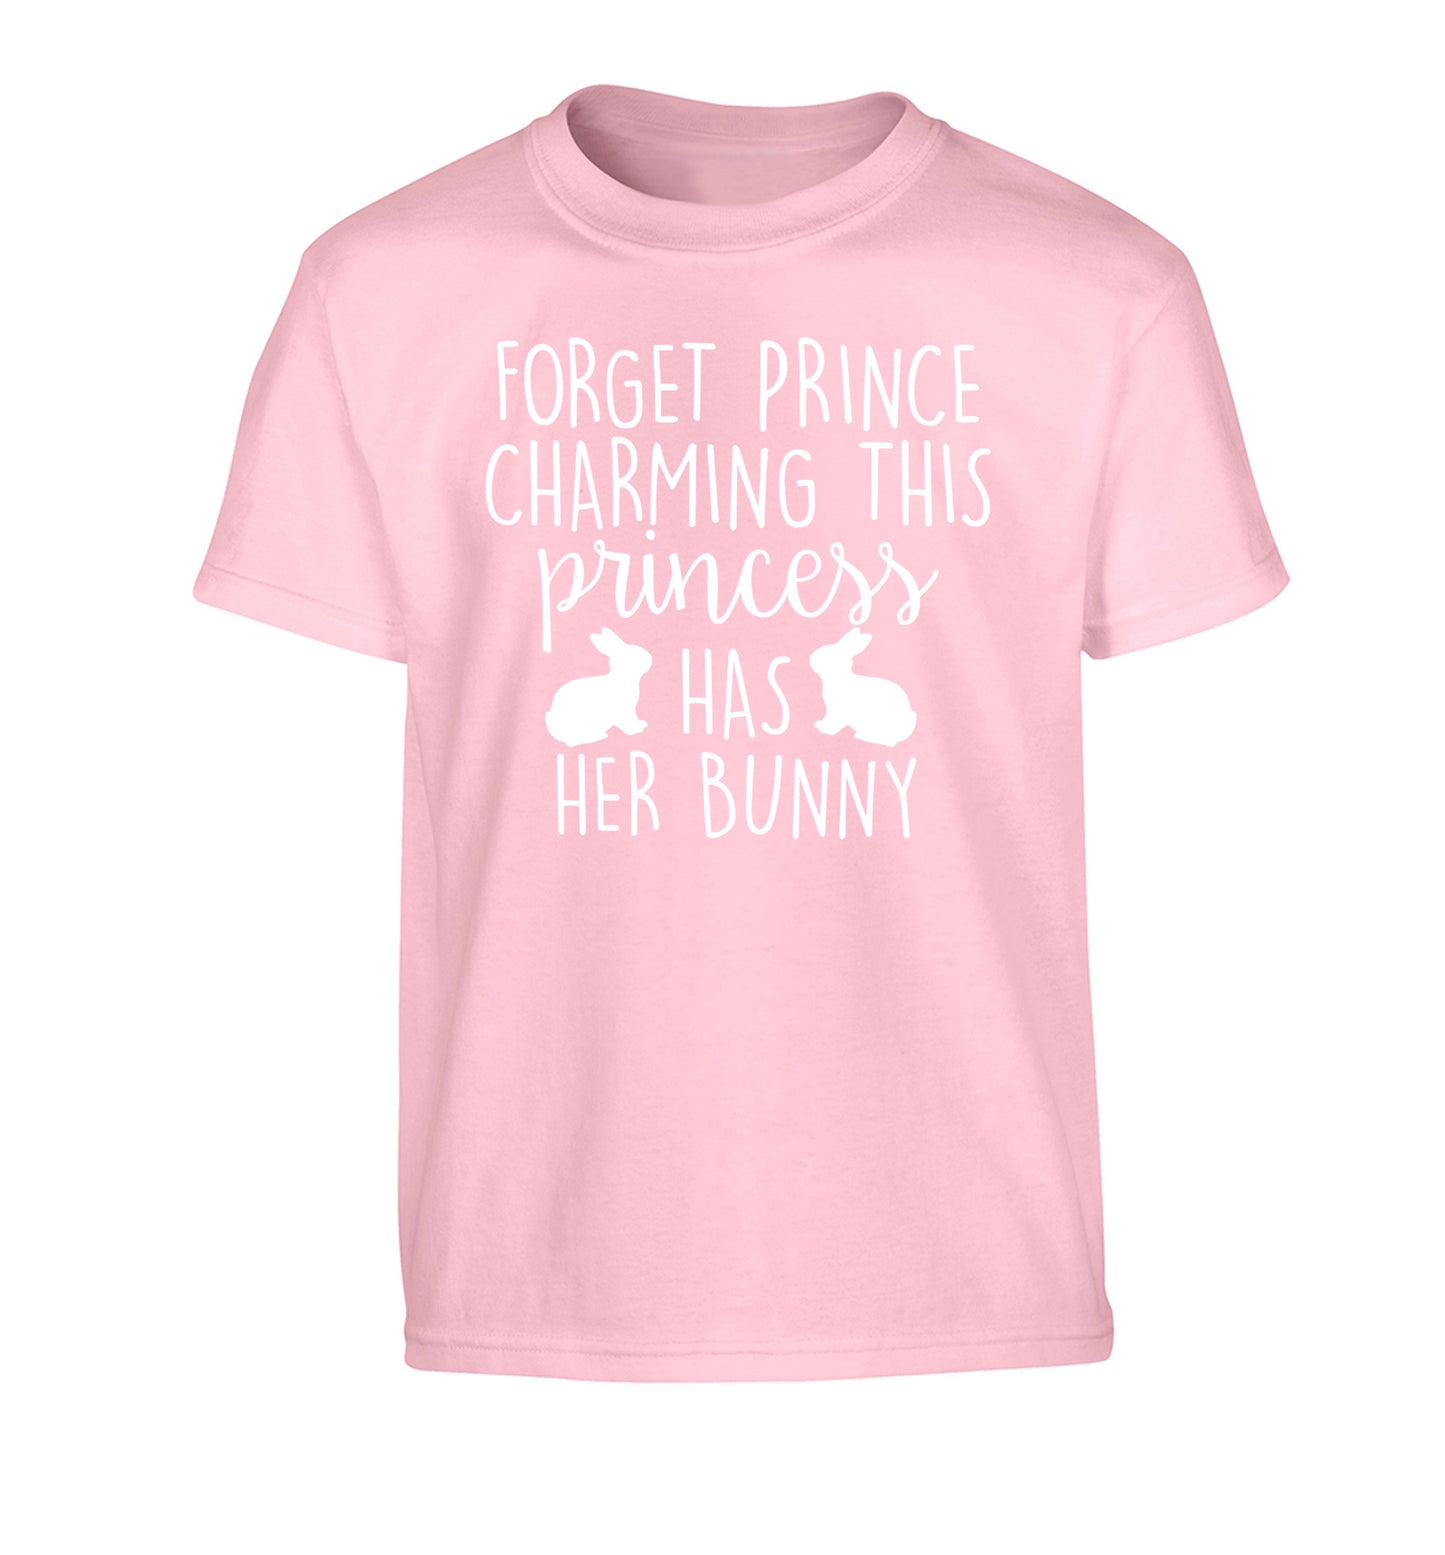 Forget prince charming this princess has her bunny Children's light pink Tshirt 12-14 Years